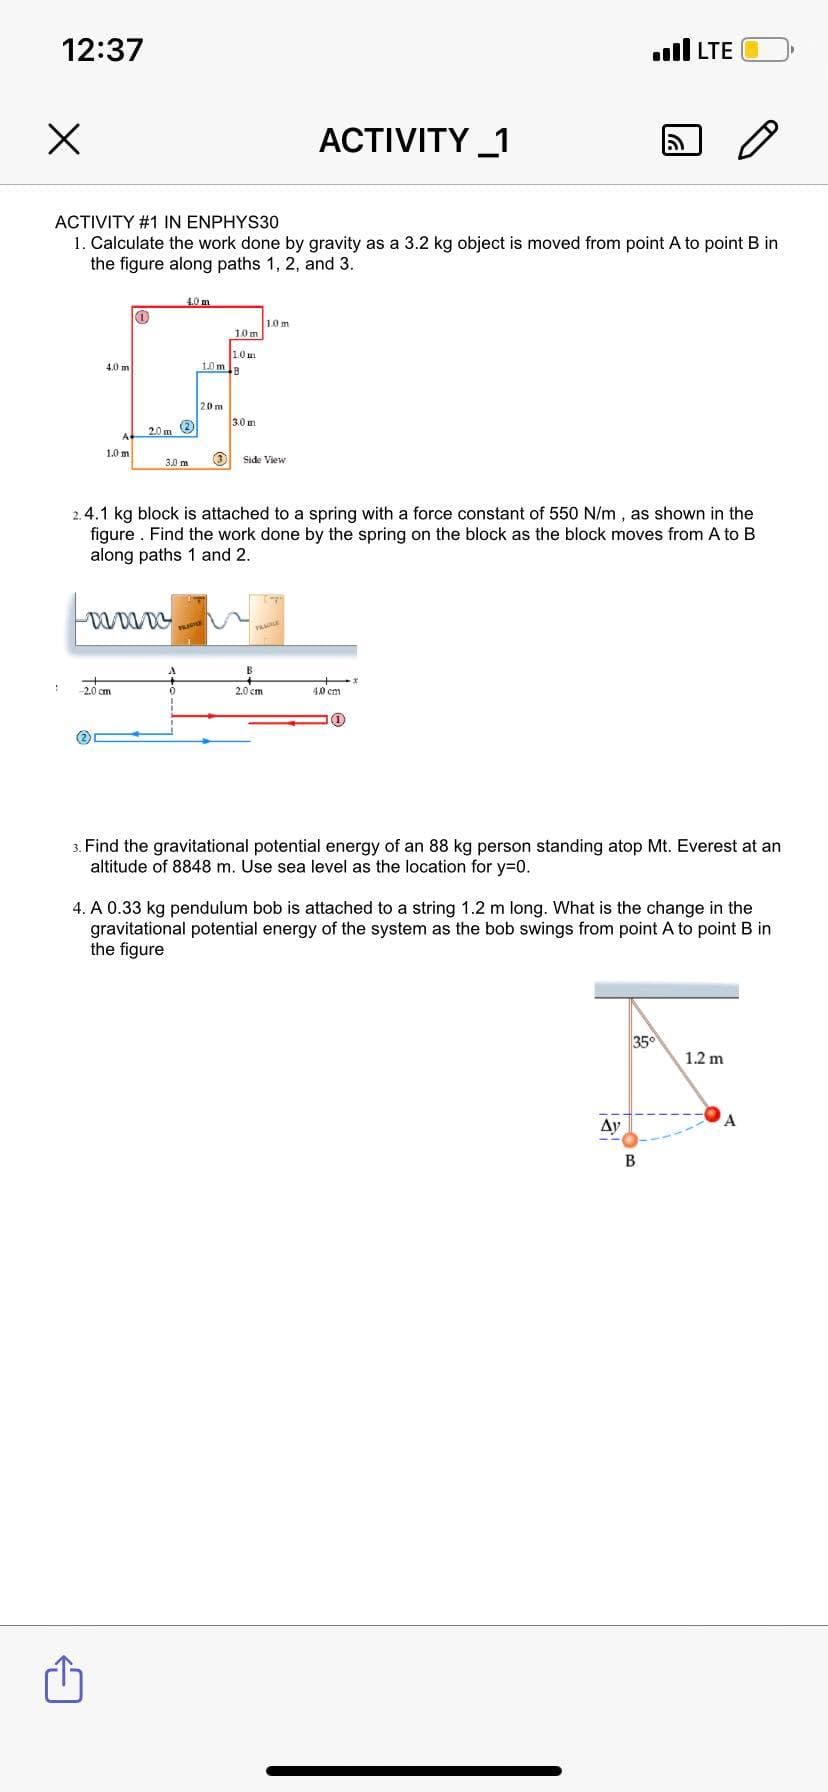 12:37
ull LTE
ACTIVITY _1
ACTIVITY #1 IN ENPHYS30
1. Calculate the work done by gravity as a 3.2 kg object is moved from point A to point B in
the figure along paths 1, 2, and 3.
4.0m
1.0 m
1.0m
1.0 m
10mB
4.0 m
20 m
3.0 m
20 m O
1.0 m
Side View
3.0 m
2.4.1 kg block is attached to a spring with a force constant of 550 N/m , as shown in the
figure . Find the work done by the spring on the block as the block moves from A to B
along paths 1 and 2.
VA
B
2.0 cm
2.0 cm
4.0 cm
(2
3. Find the gravitational potential energy of an 88 kg person standing atop Mt. Everest at an
altitude of 8848 m. Use sea level as the location for y=0.
4. A 0.33 kg pendulum bob is attached to a string 1.2 m long. What is the change in the
gravitational potential energy of the system as the bob swings from point A to point B in
the figure
35
1.2 m
Ay
В
